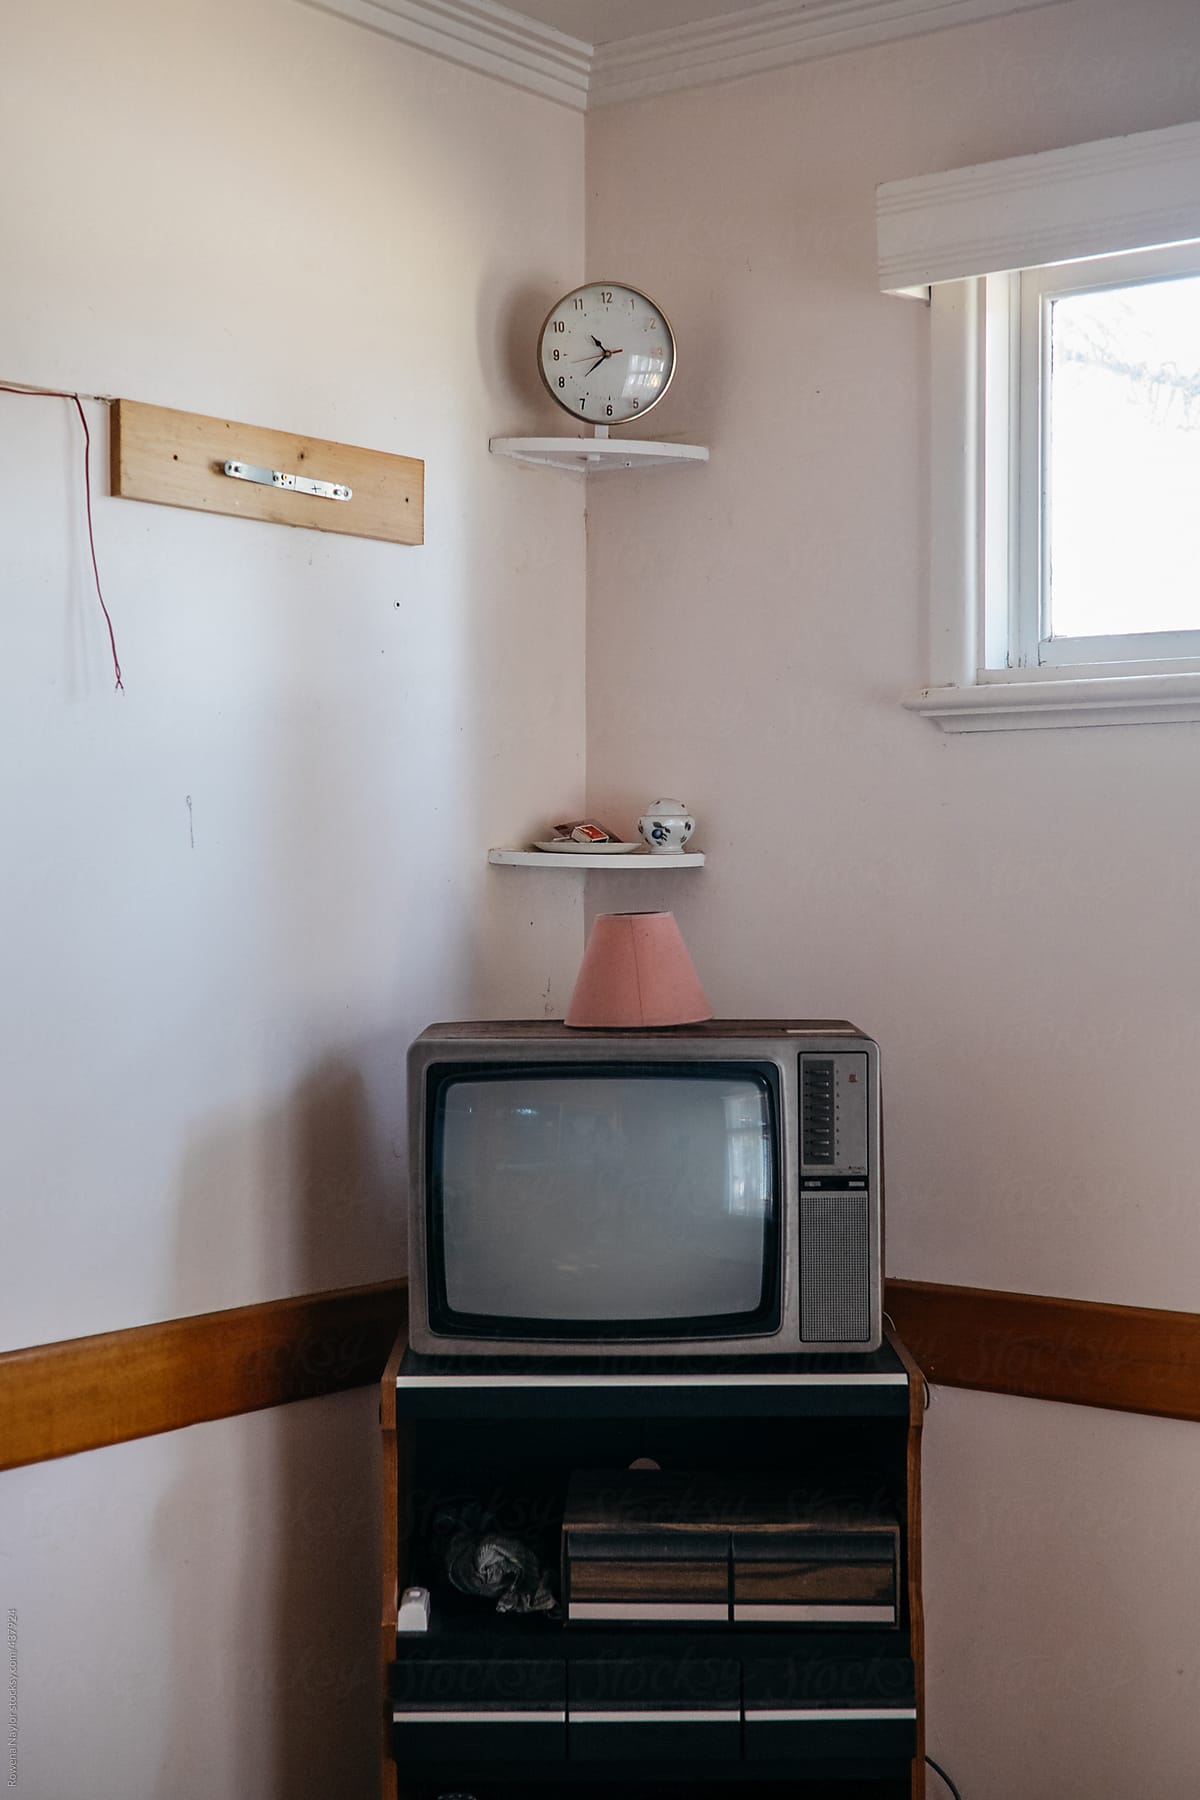 Old Analogue TV and clock